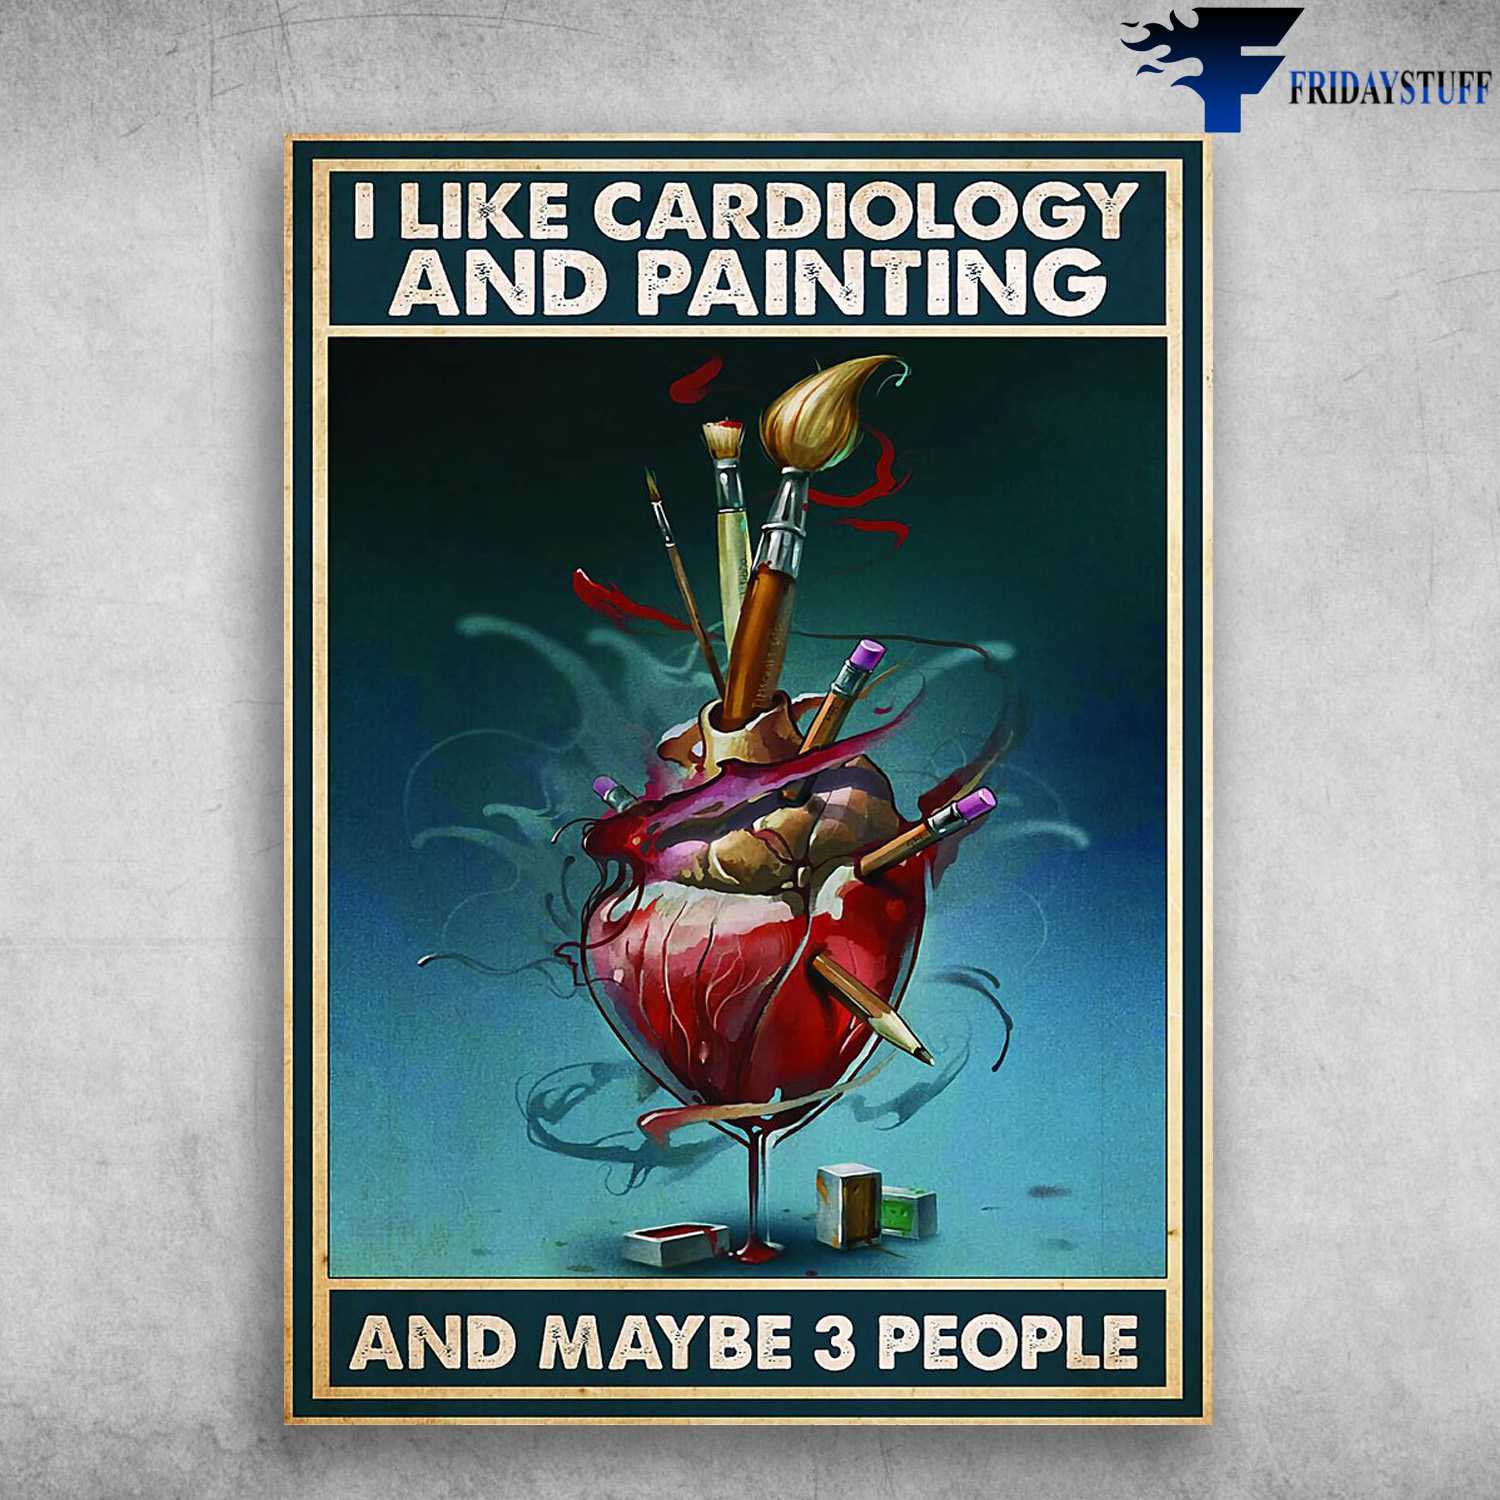 Draw in Your Heart - I Like Cardiology And Painting, And Maybe 3 People